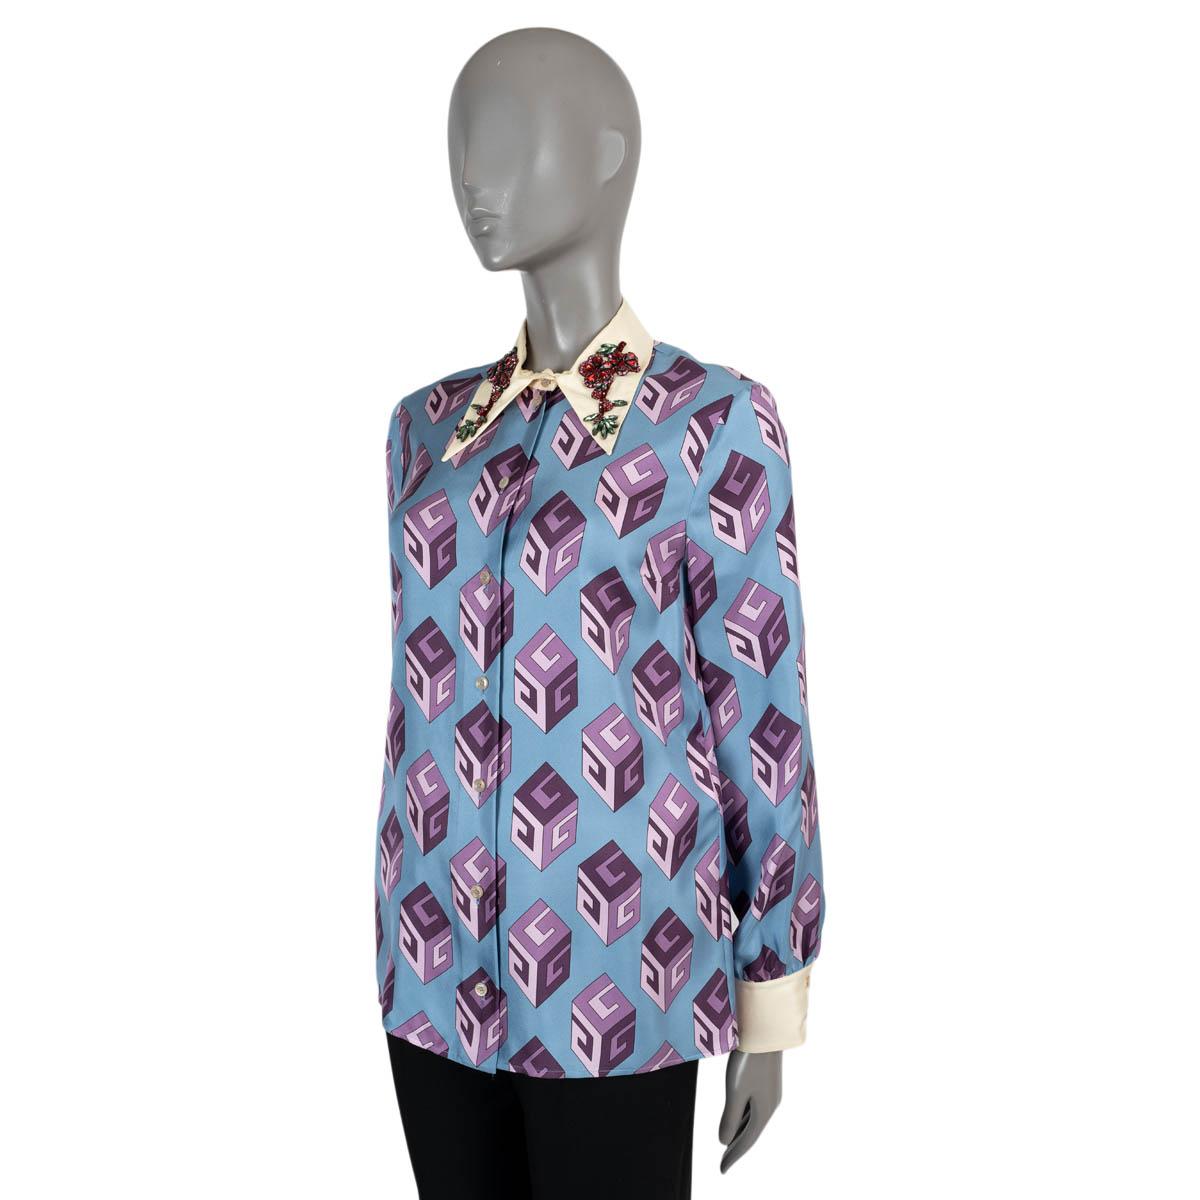 100% authentic Gucci blouse in light blue silk (100%). Features G Cube print in purple, cream cuffs and pointed collar embellished with red and green floral crystals for a dazzling finish. Closes with buttons on the front. Has been worn and is in